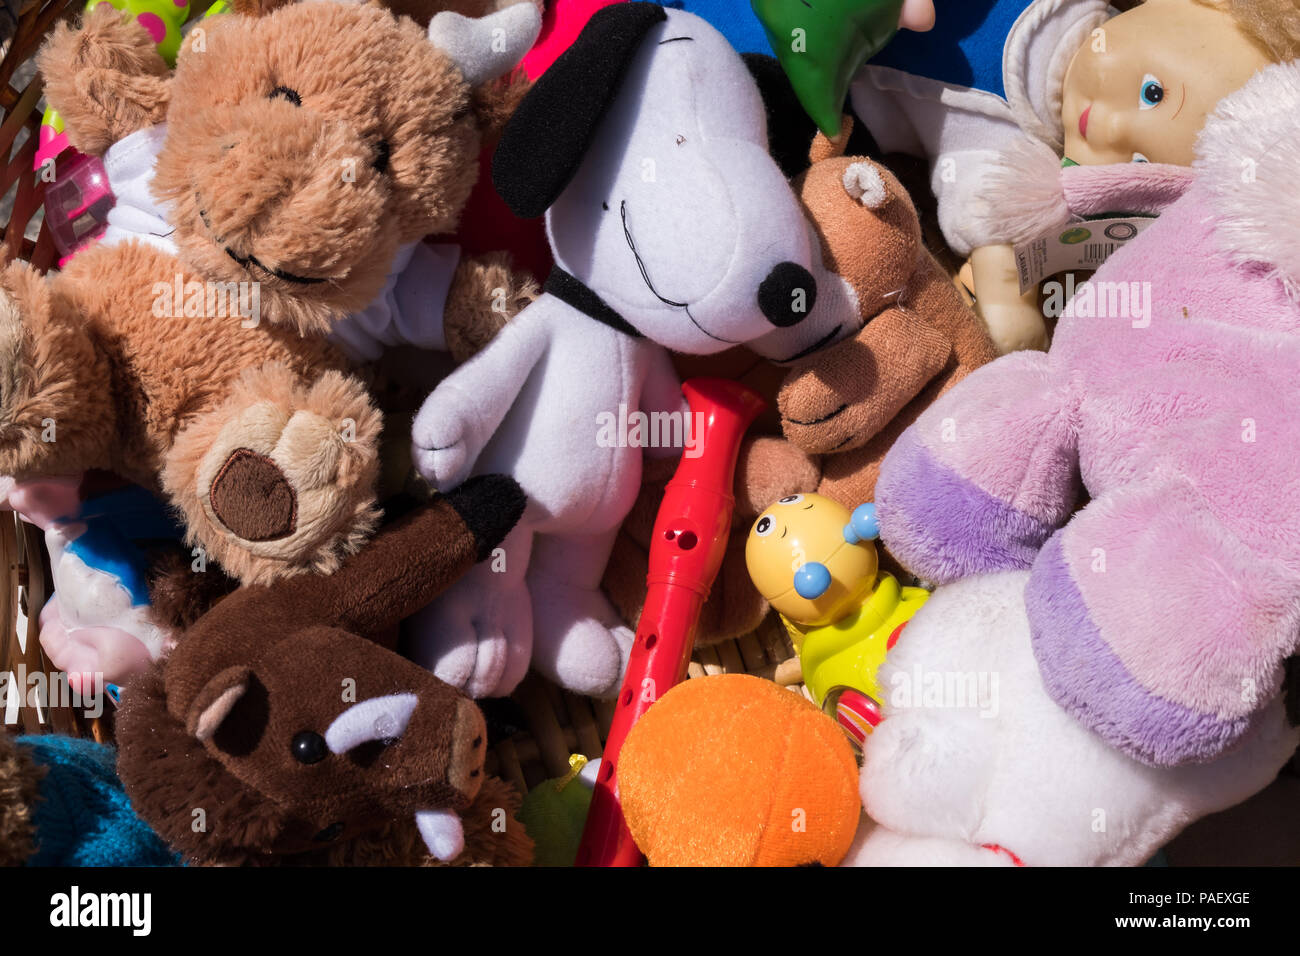 Colorful toy puppets on a basket. Stock Photo